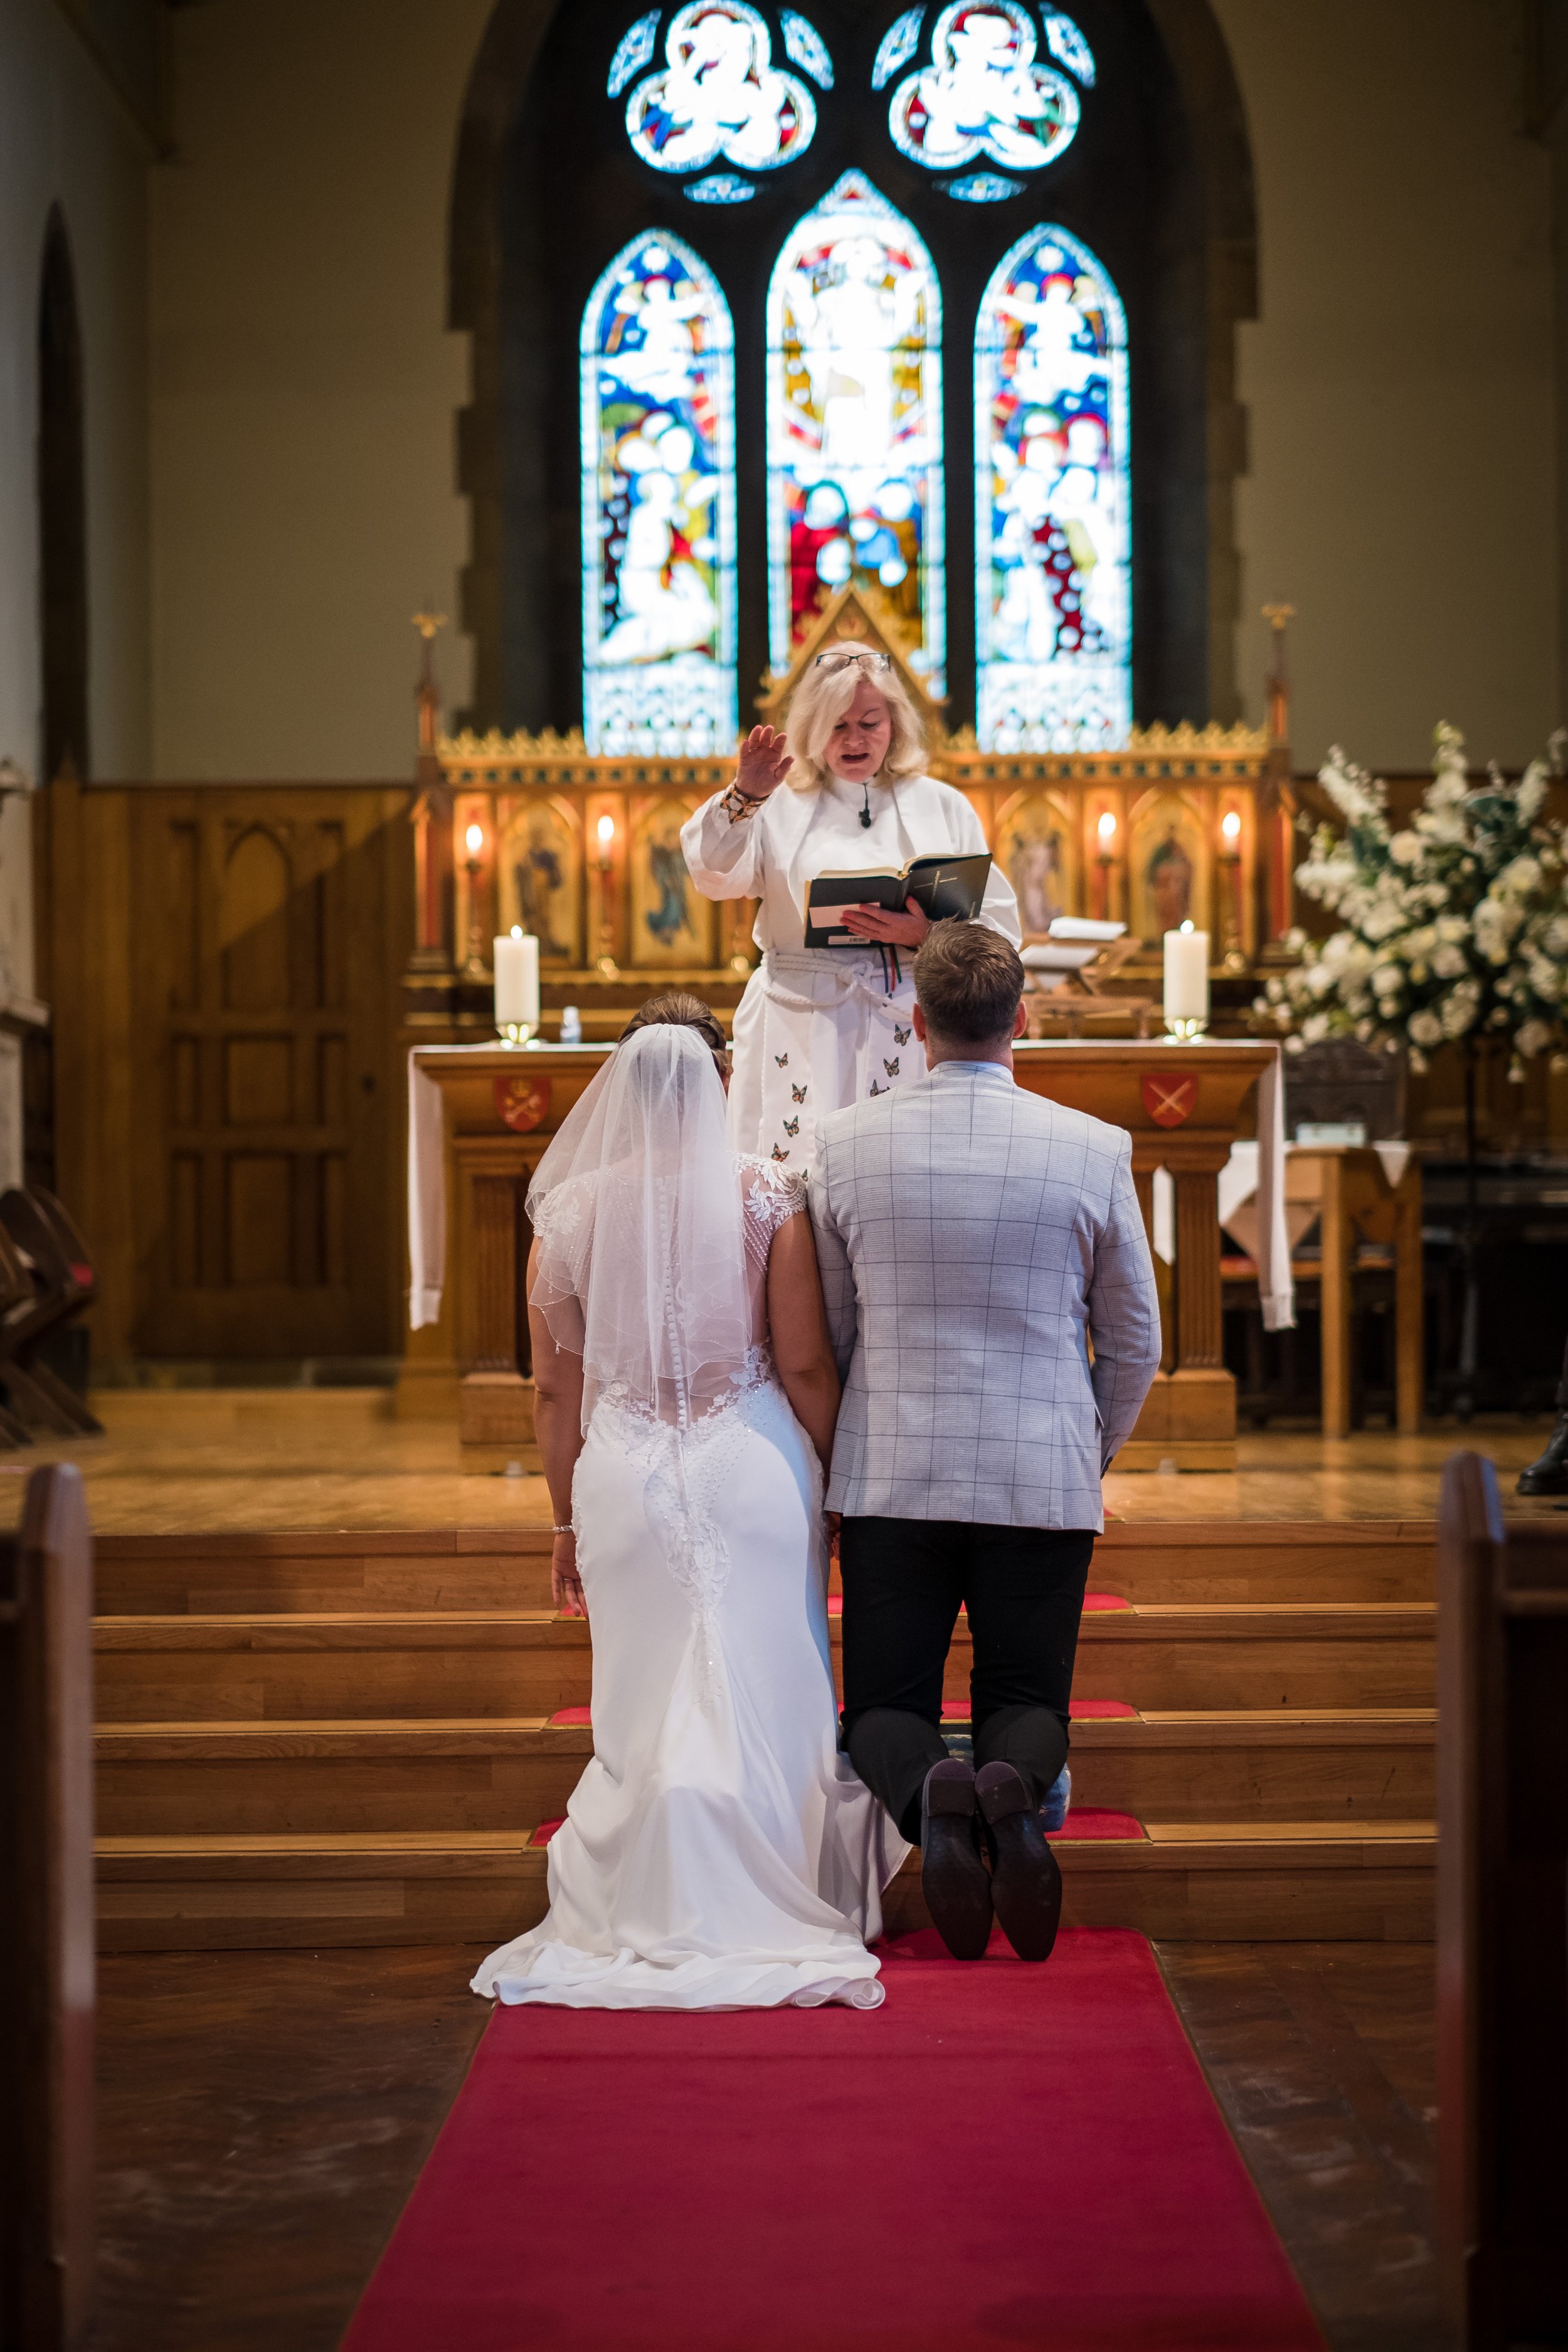 Sarah and Rob kneel before the Vicar as she prays over them.